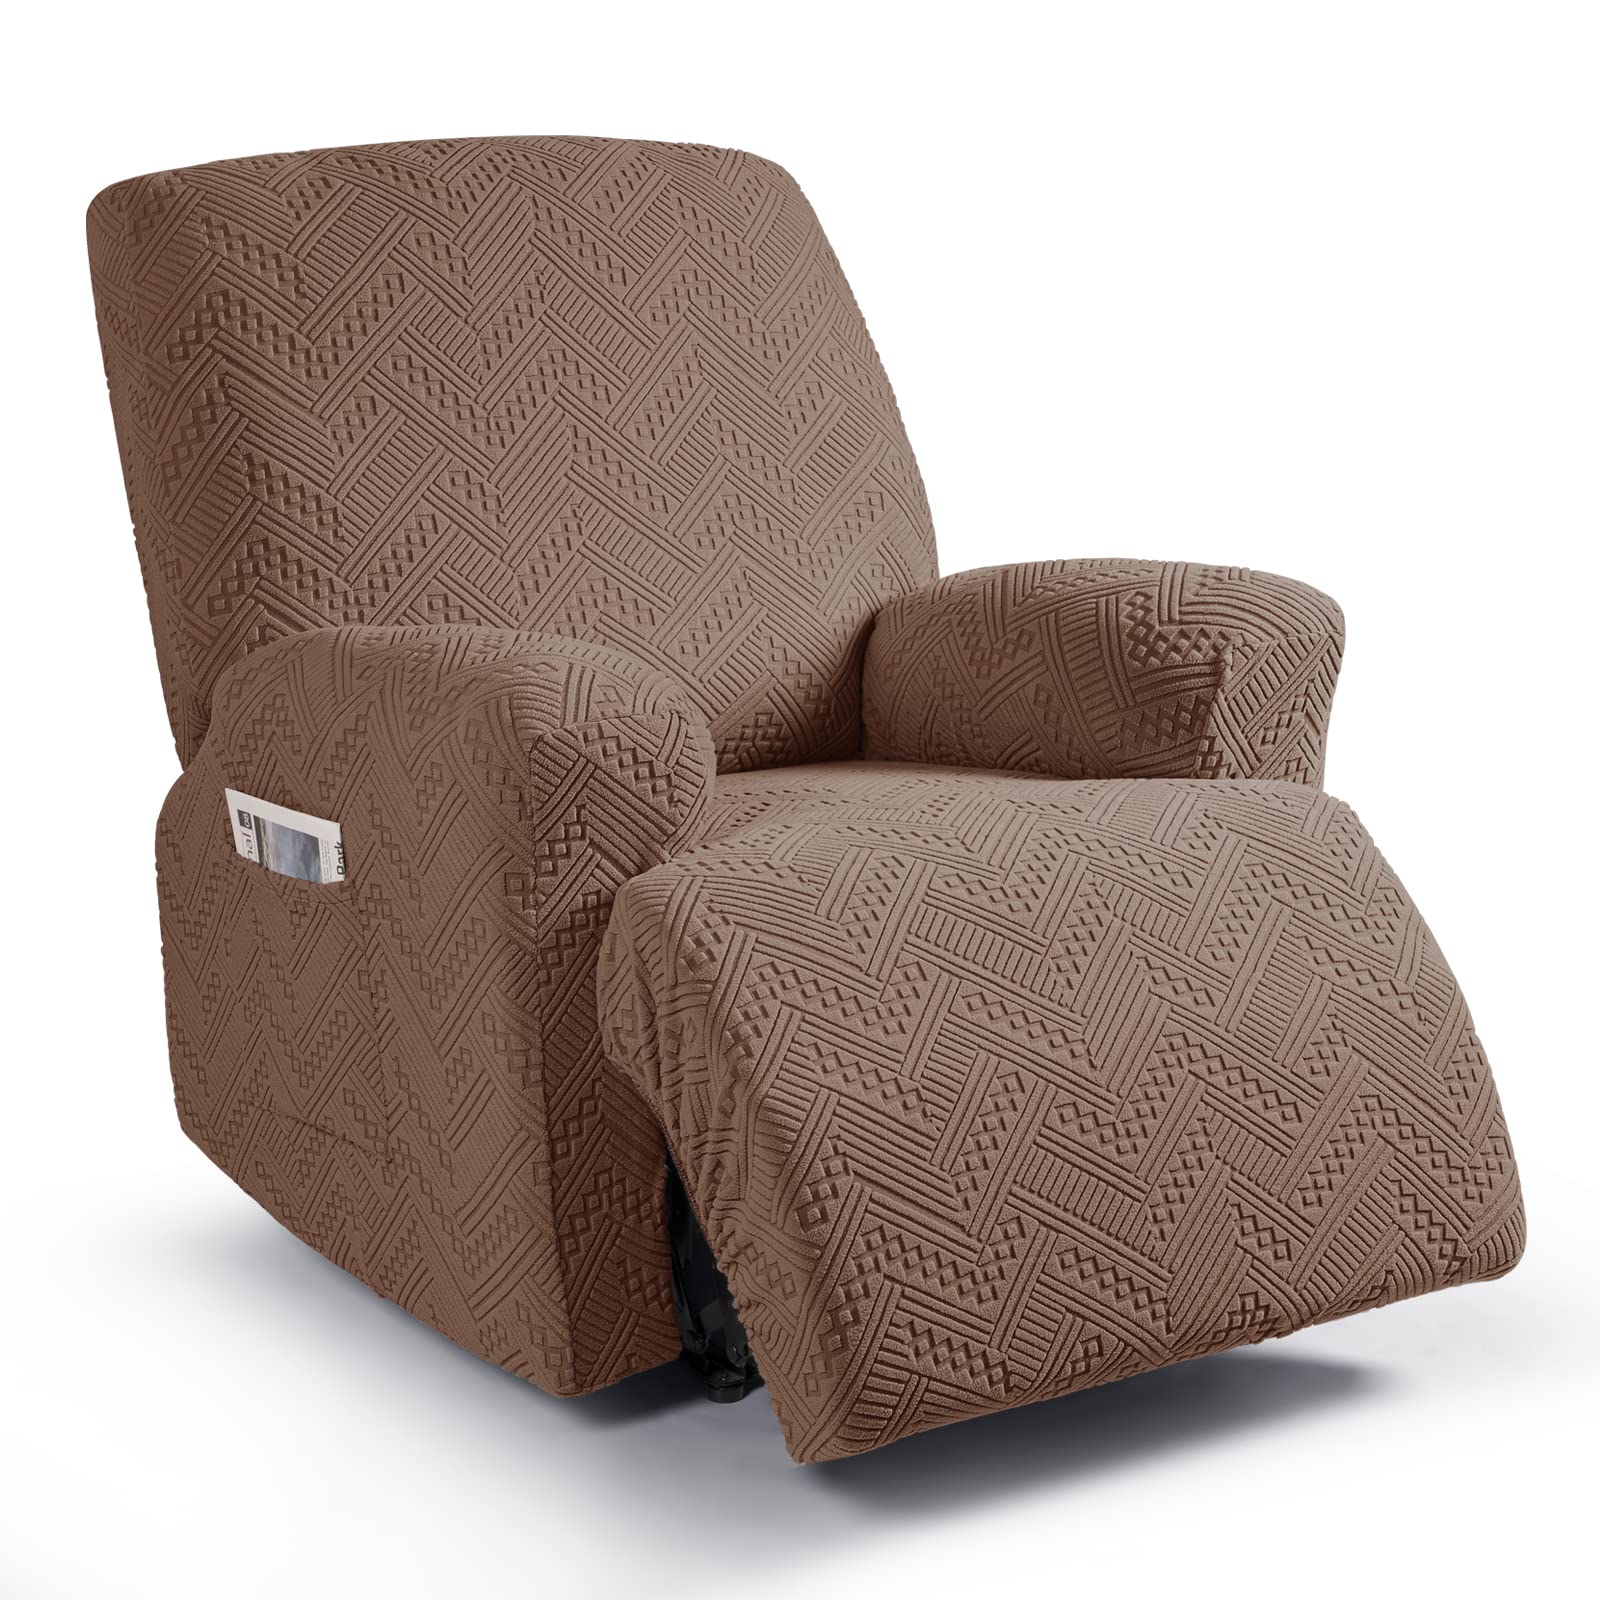 Ruaozz Stretch Recliner Chair Cover 3-Pieces Recliner Covers for Recliner Chair with Pockets Soft Jacquard Reclining Chair Cover